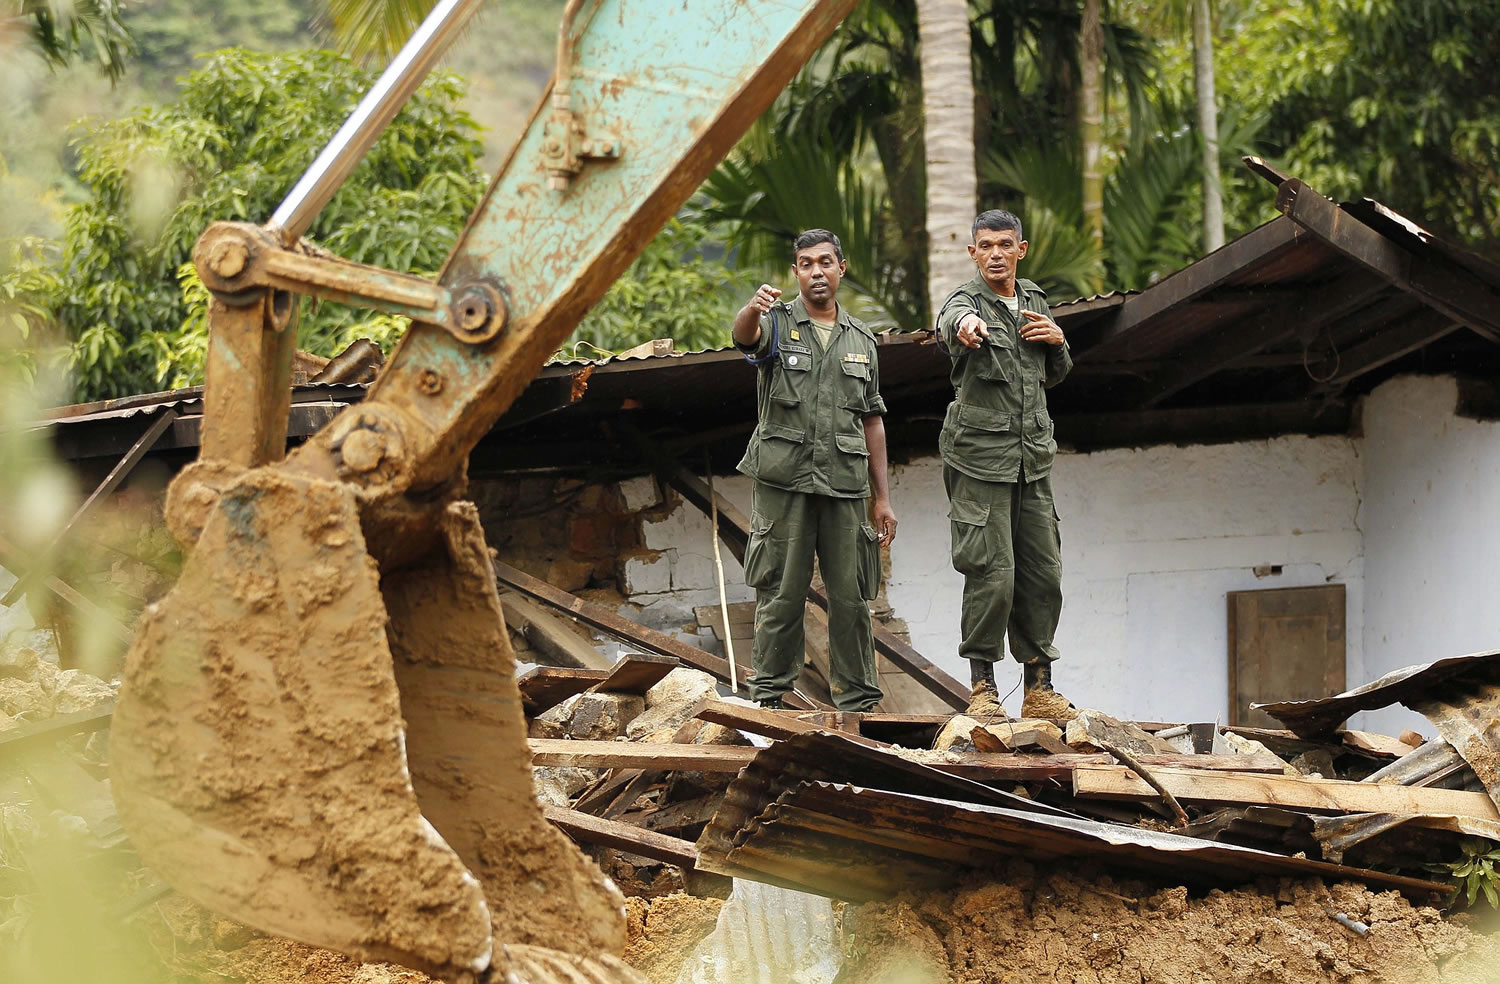 Sri Lankan army soldiers direct an excavator clearing debris Friday at the site of a mudslide in at the Koslanda tea plantation in Badulla district, about 140 miles east of Colombo, Sri Lanka. Disaster officials estimate that about 100 people were killed Wednesday morning when monsoon rains unleashed a cascade of muddy earth at the plantation and warned of more landslides at the area.